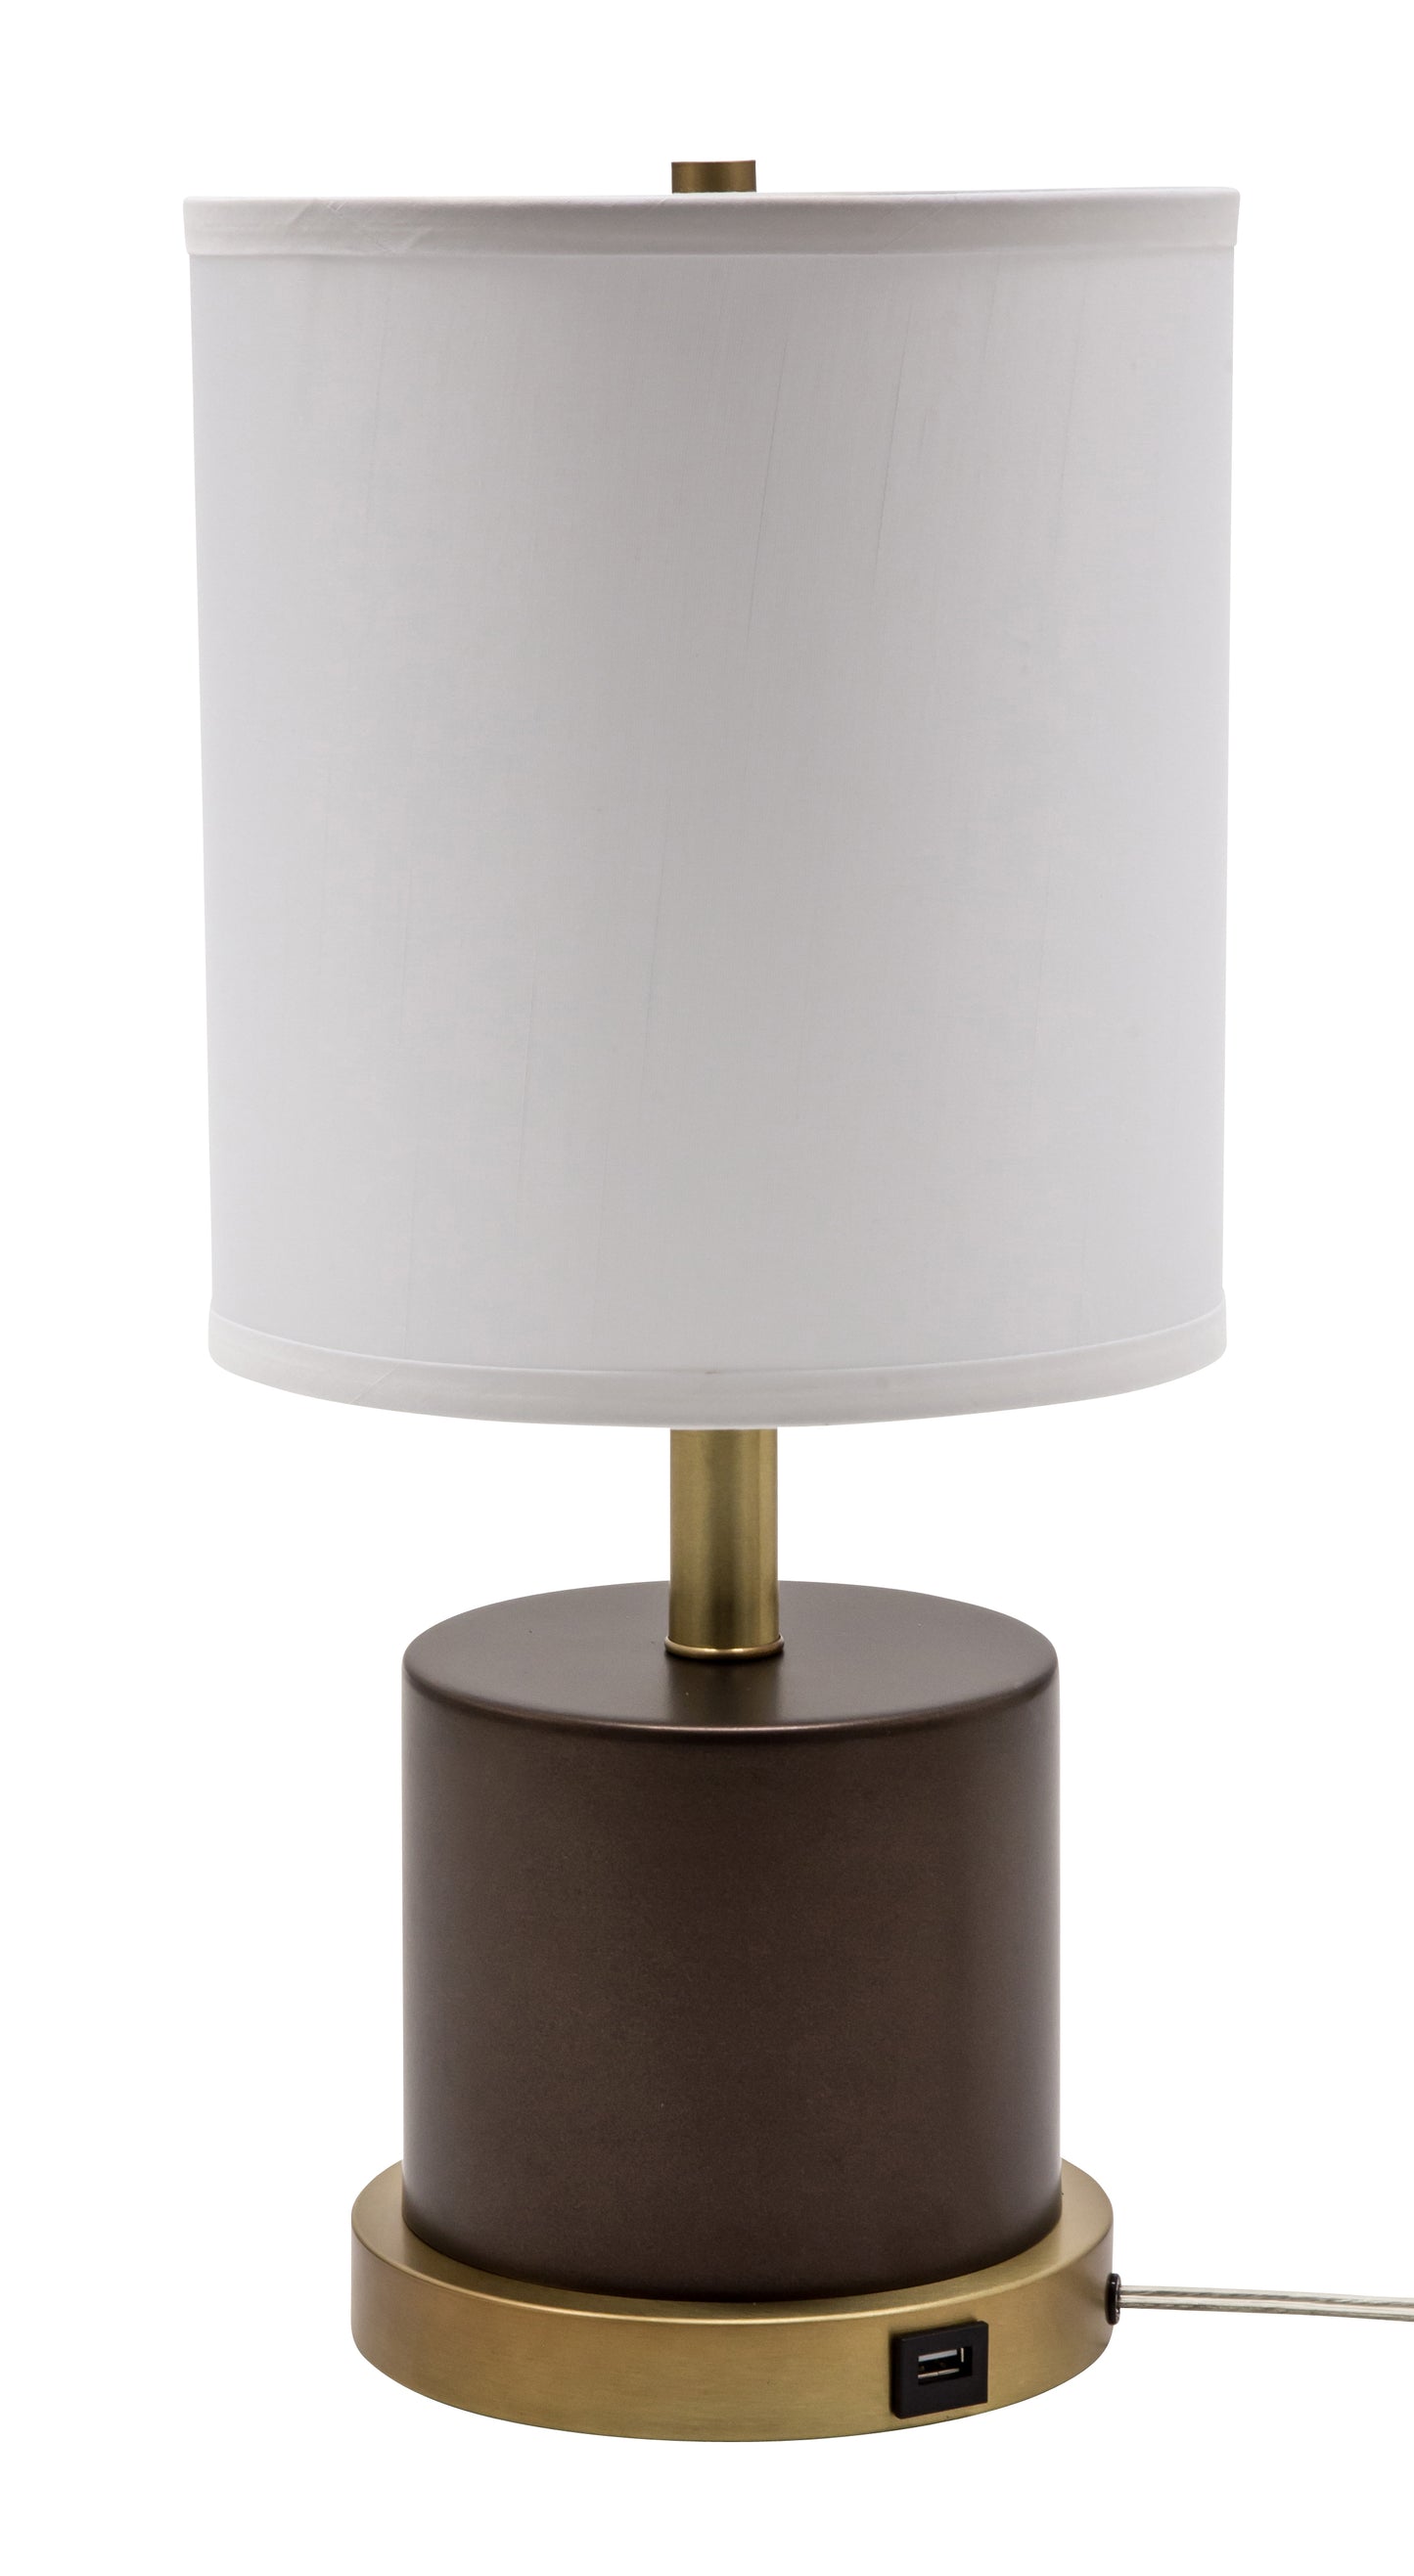 House of Troy Rupert table lamp Chestnut Bronze with weathered brass accents and USB port RU752-CHB